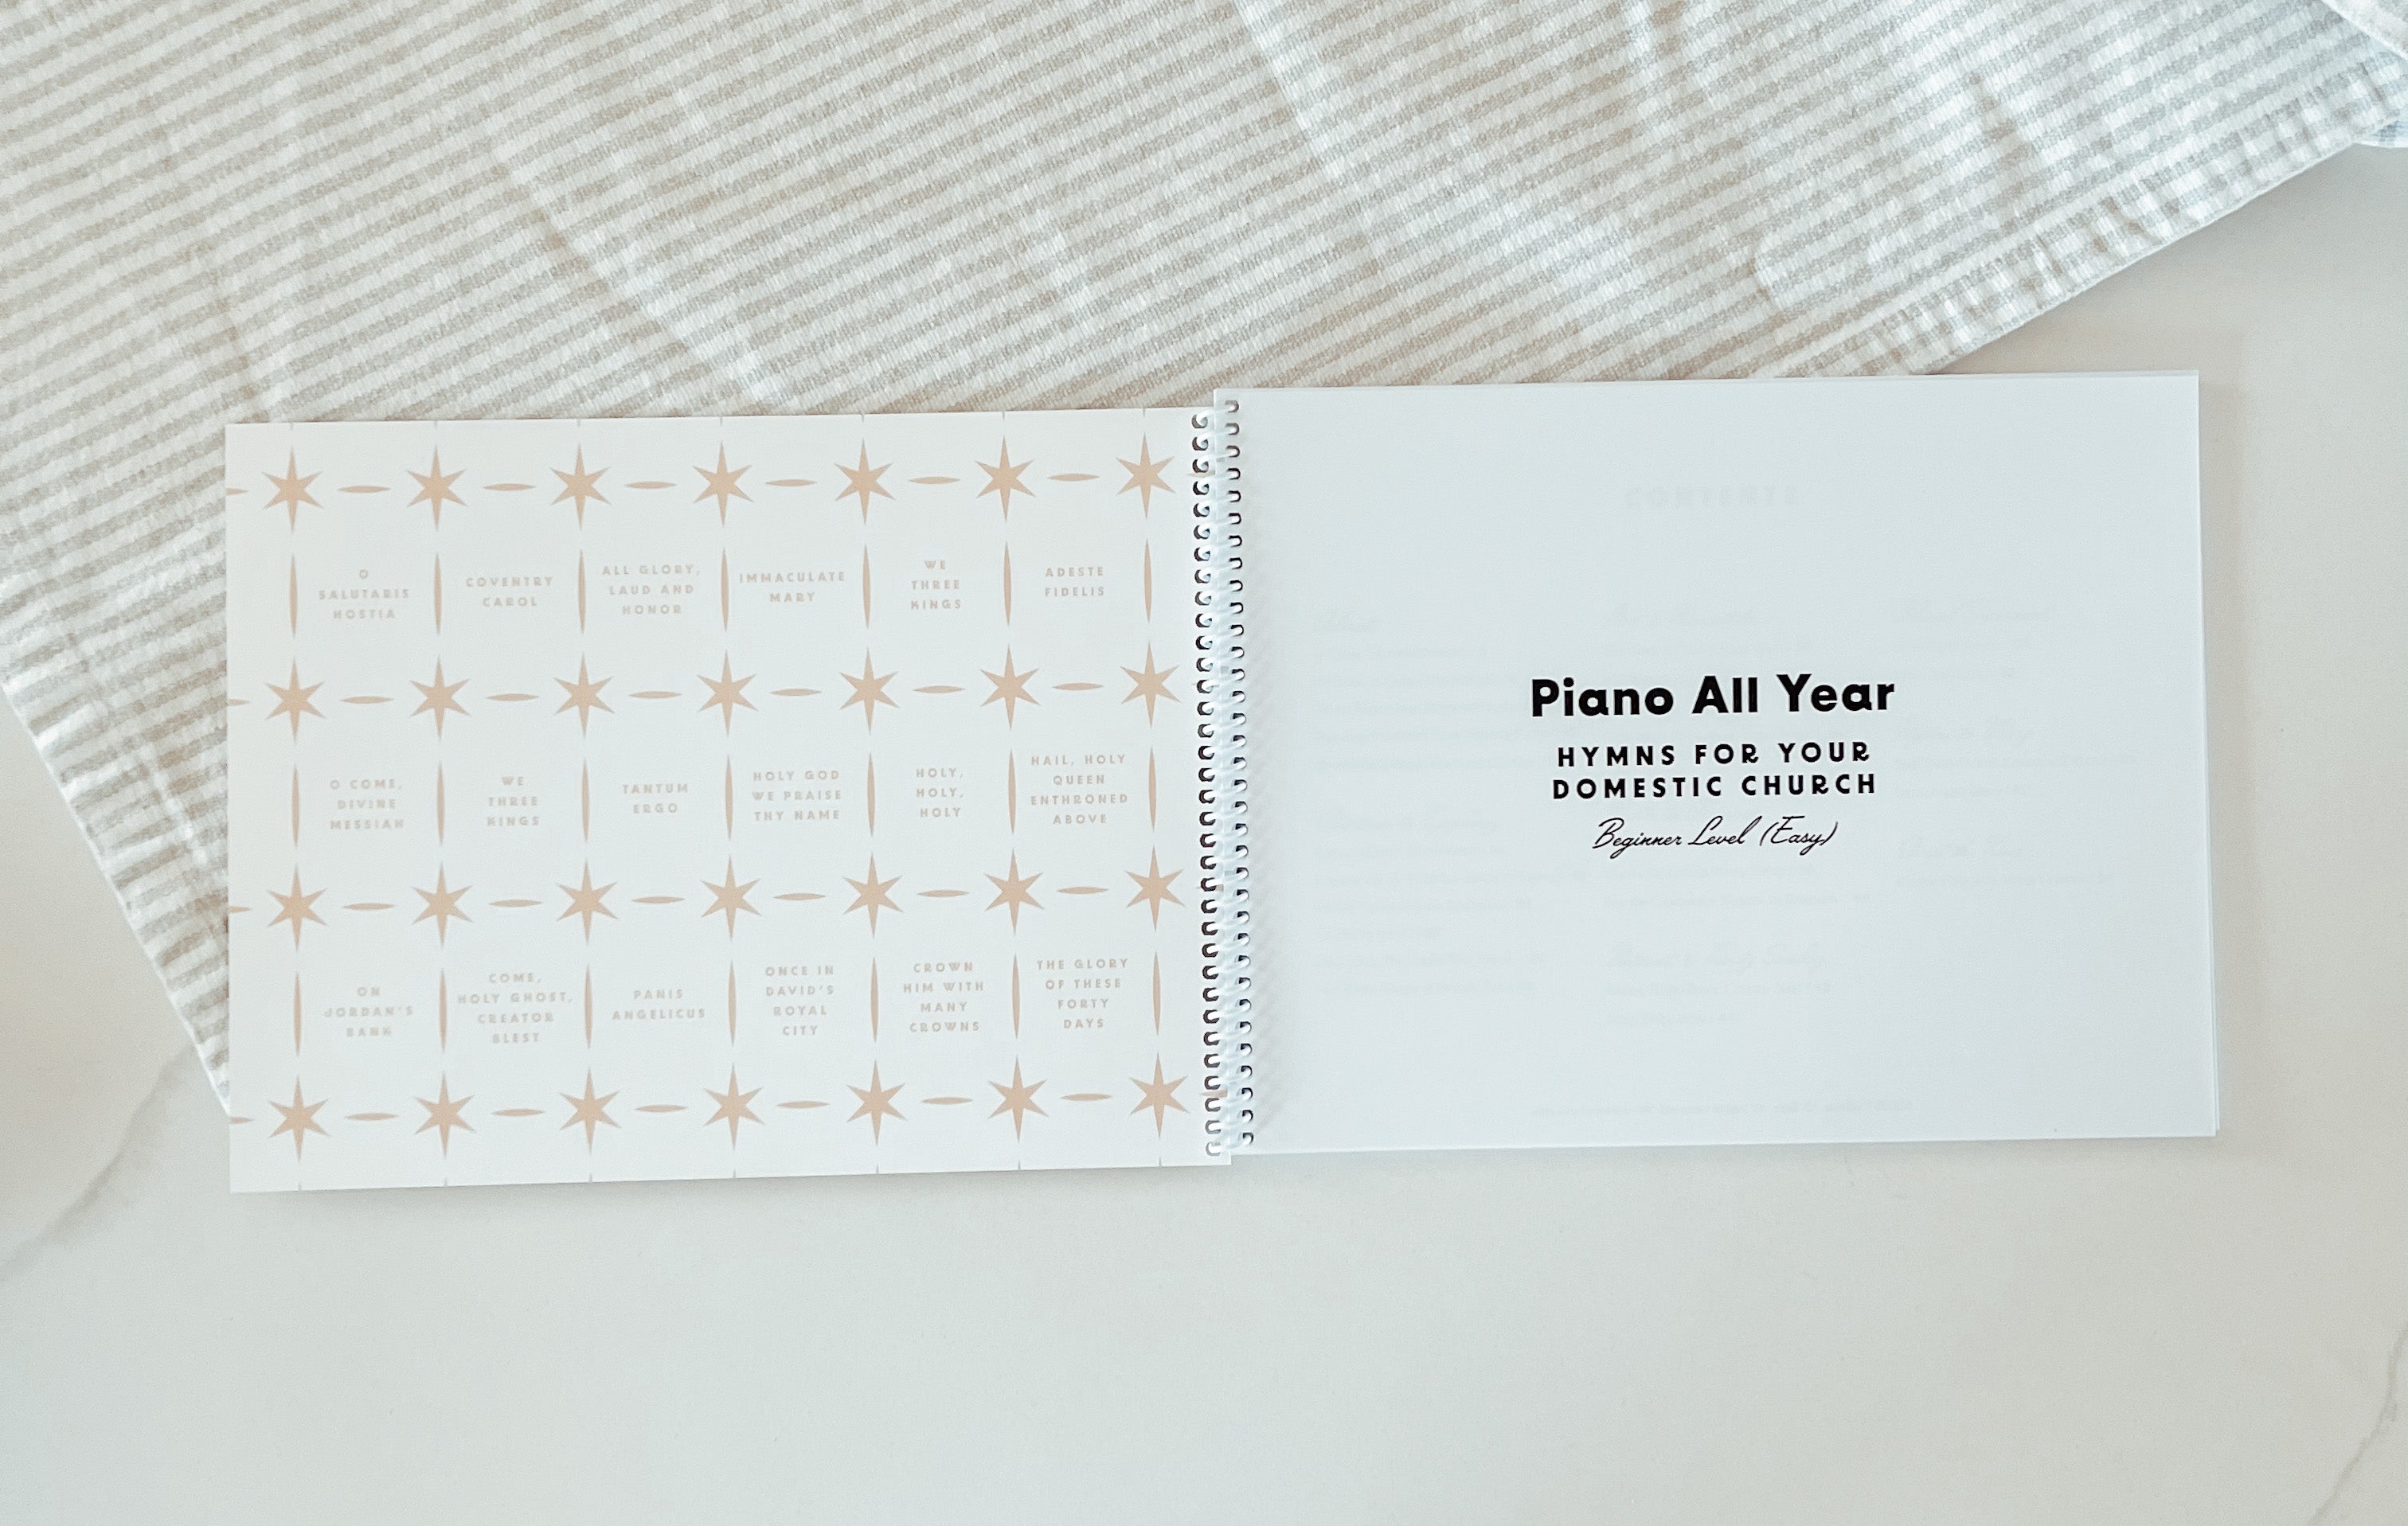 Piano All Year: Hymns for Your Domestic Church